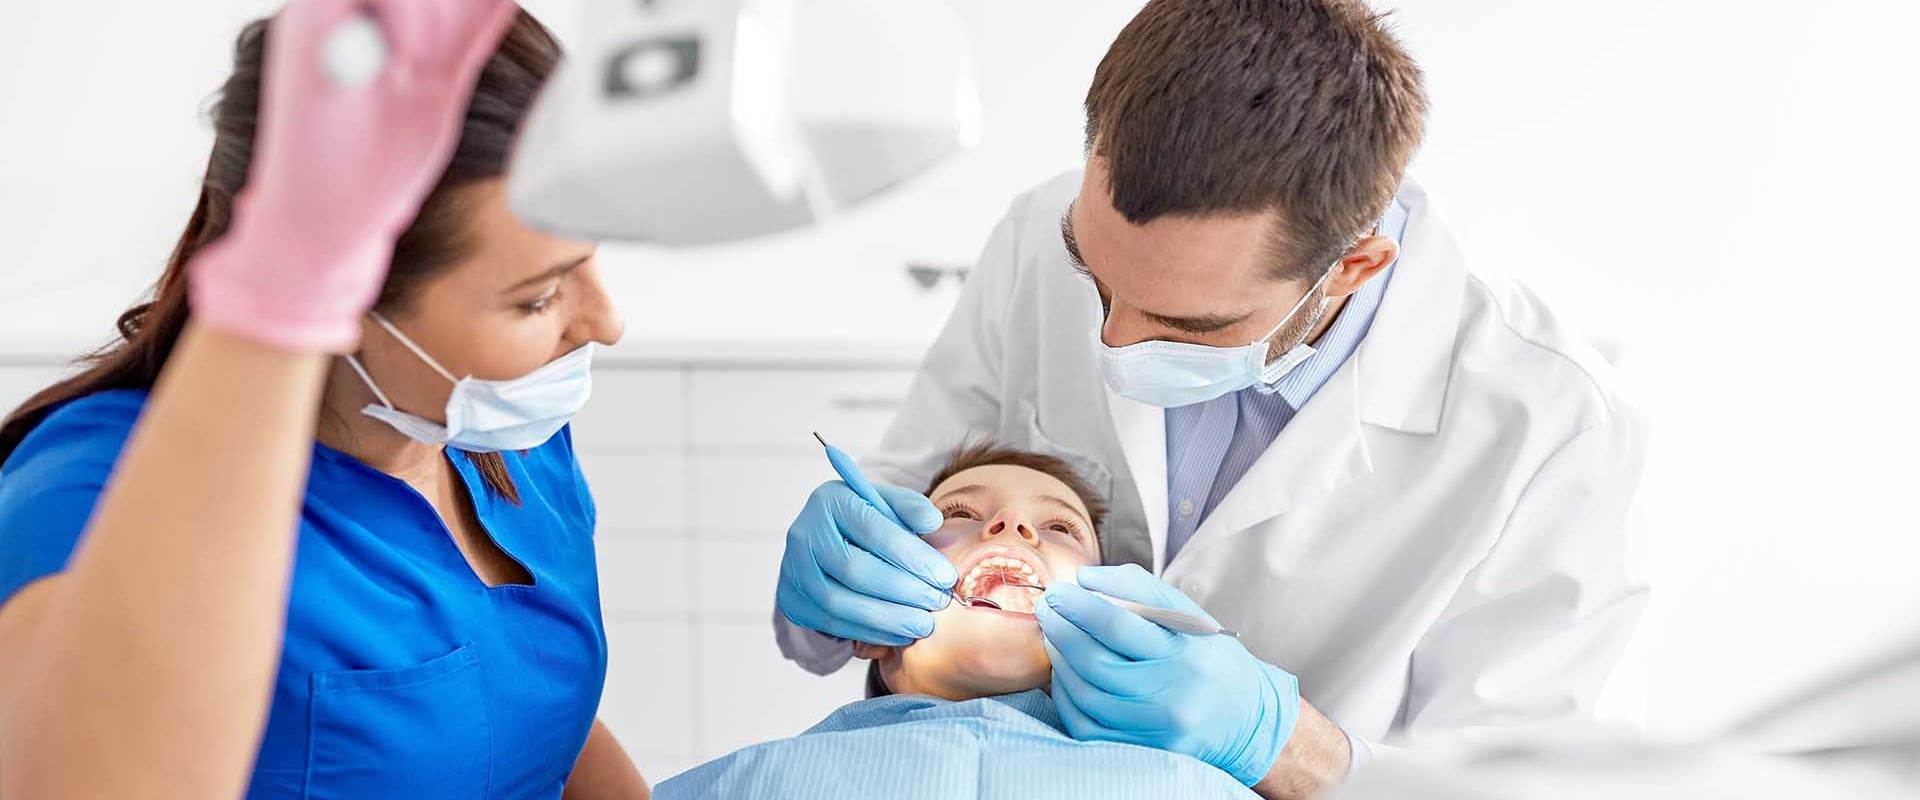 Why are dentists important to society?